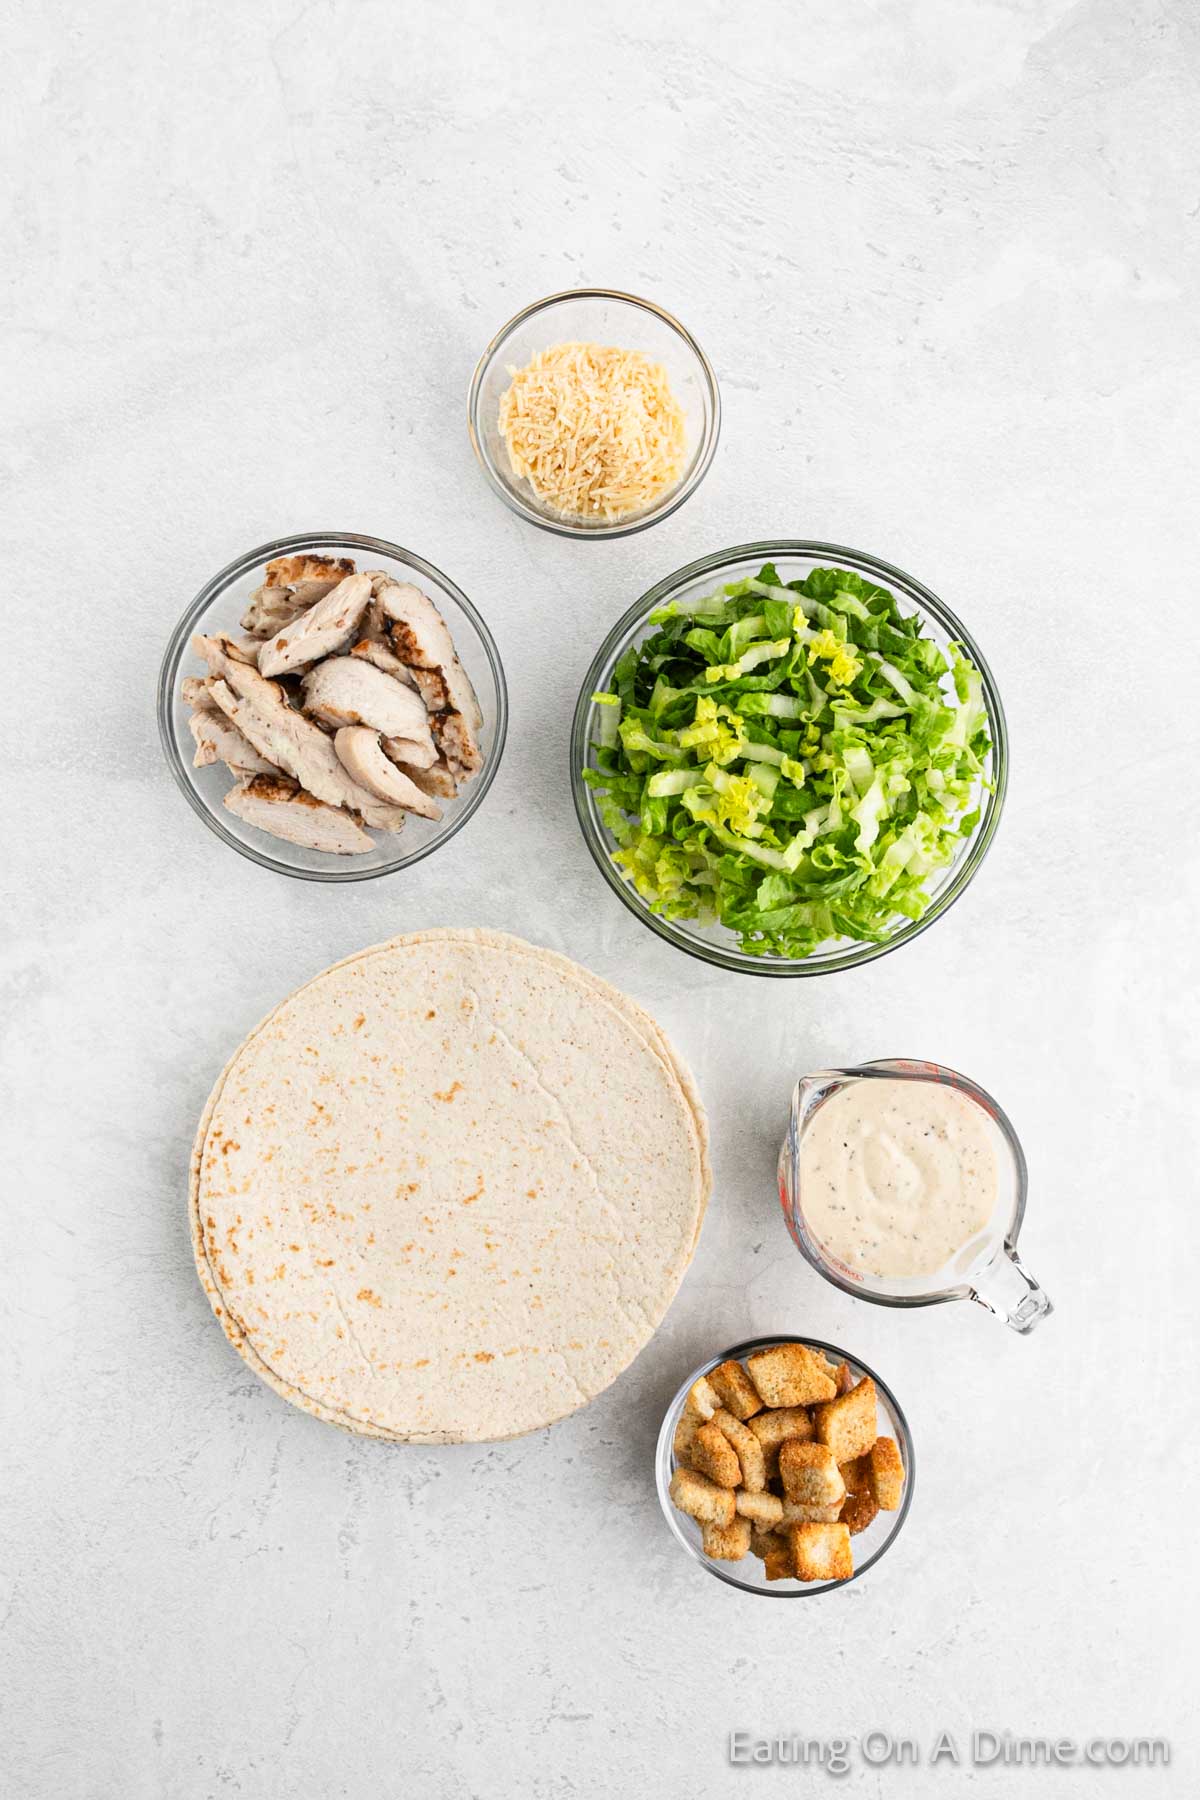 Ingredients - Tortilla on a plate, grilled chicken strips, shredded lettuce, caesar salad dressing, croutons and parmesan cheese